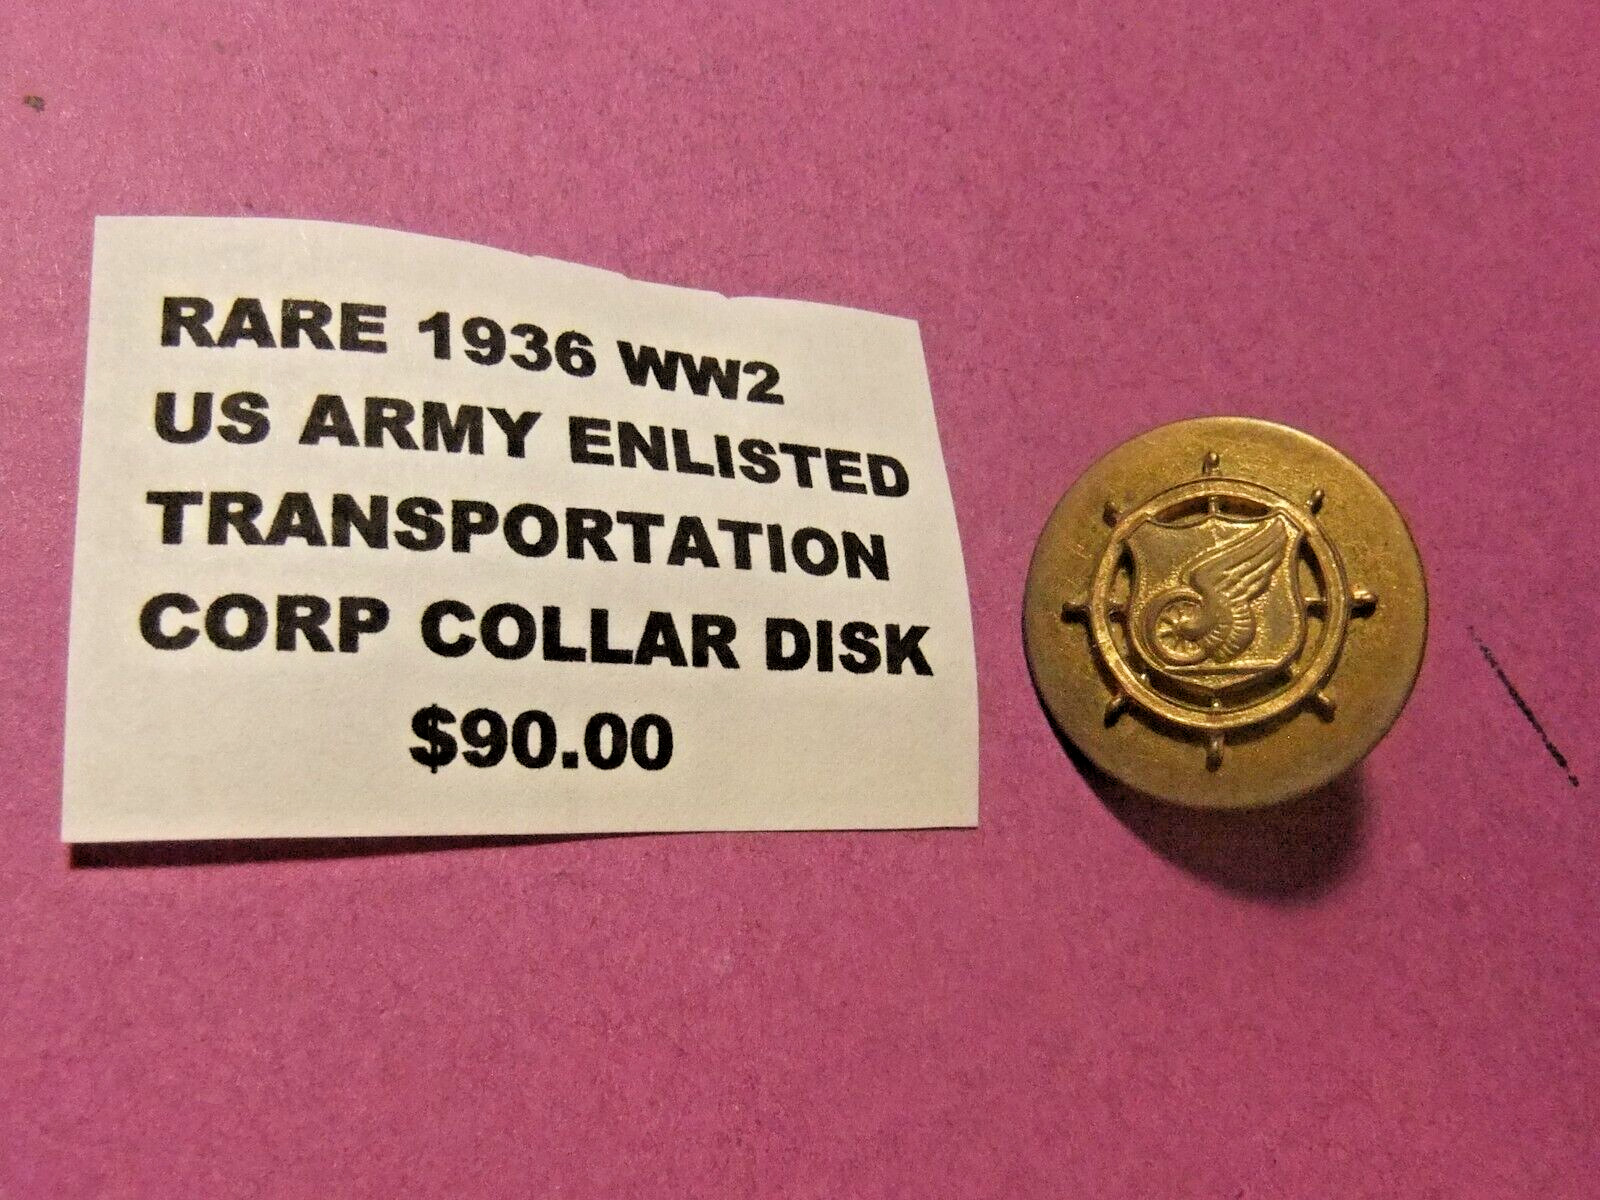 VERY RARE 1936 WWII US Army Enlisted Transportation Corp Collar Disk